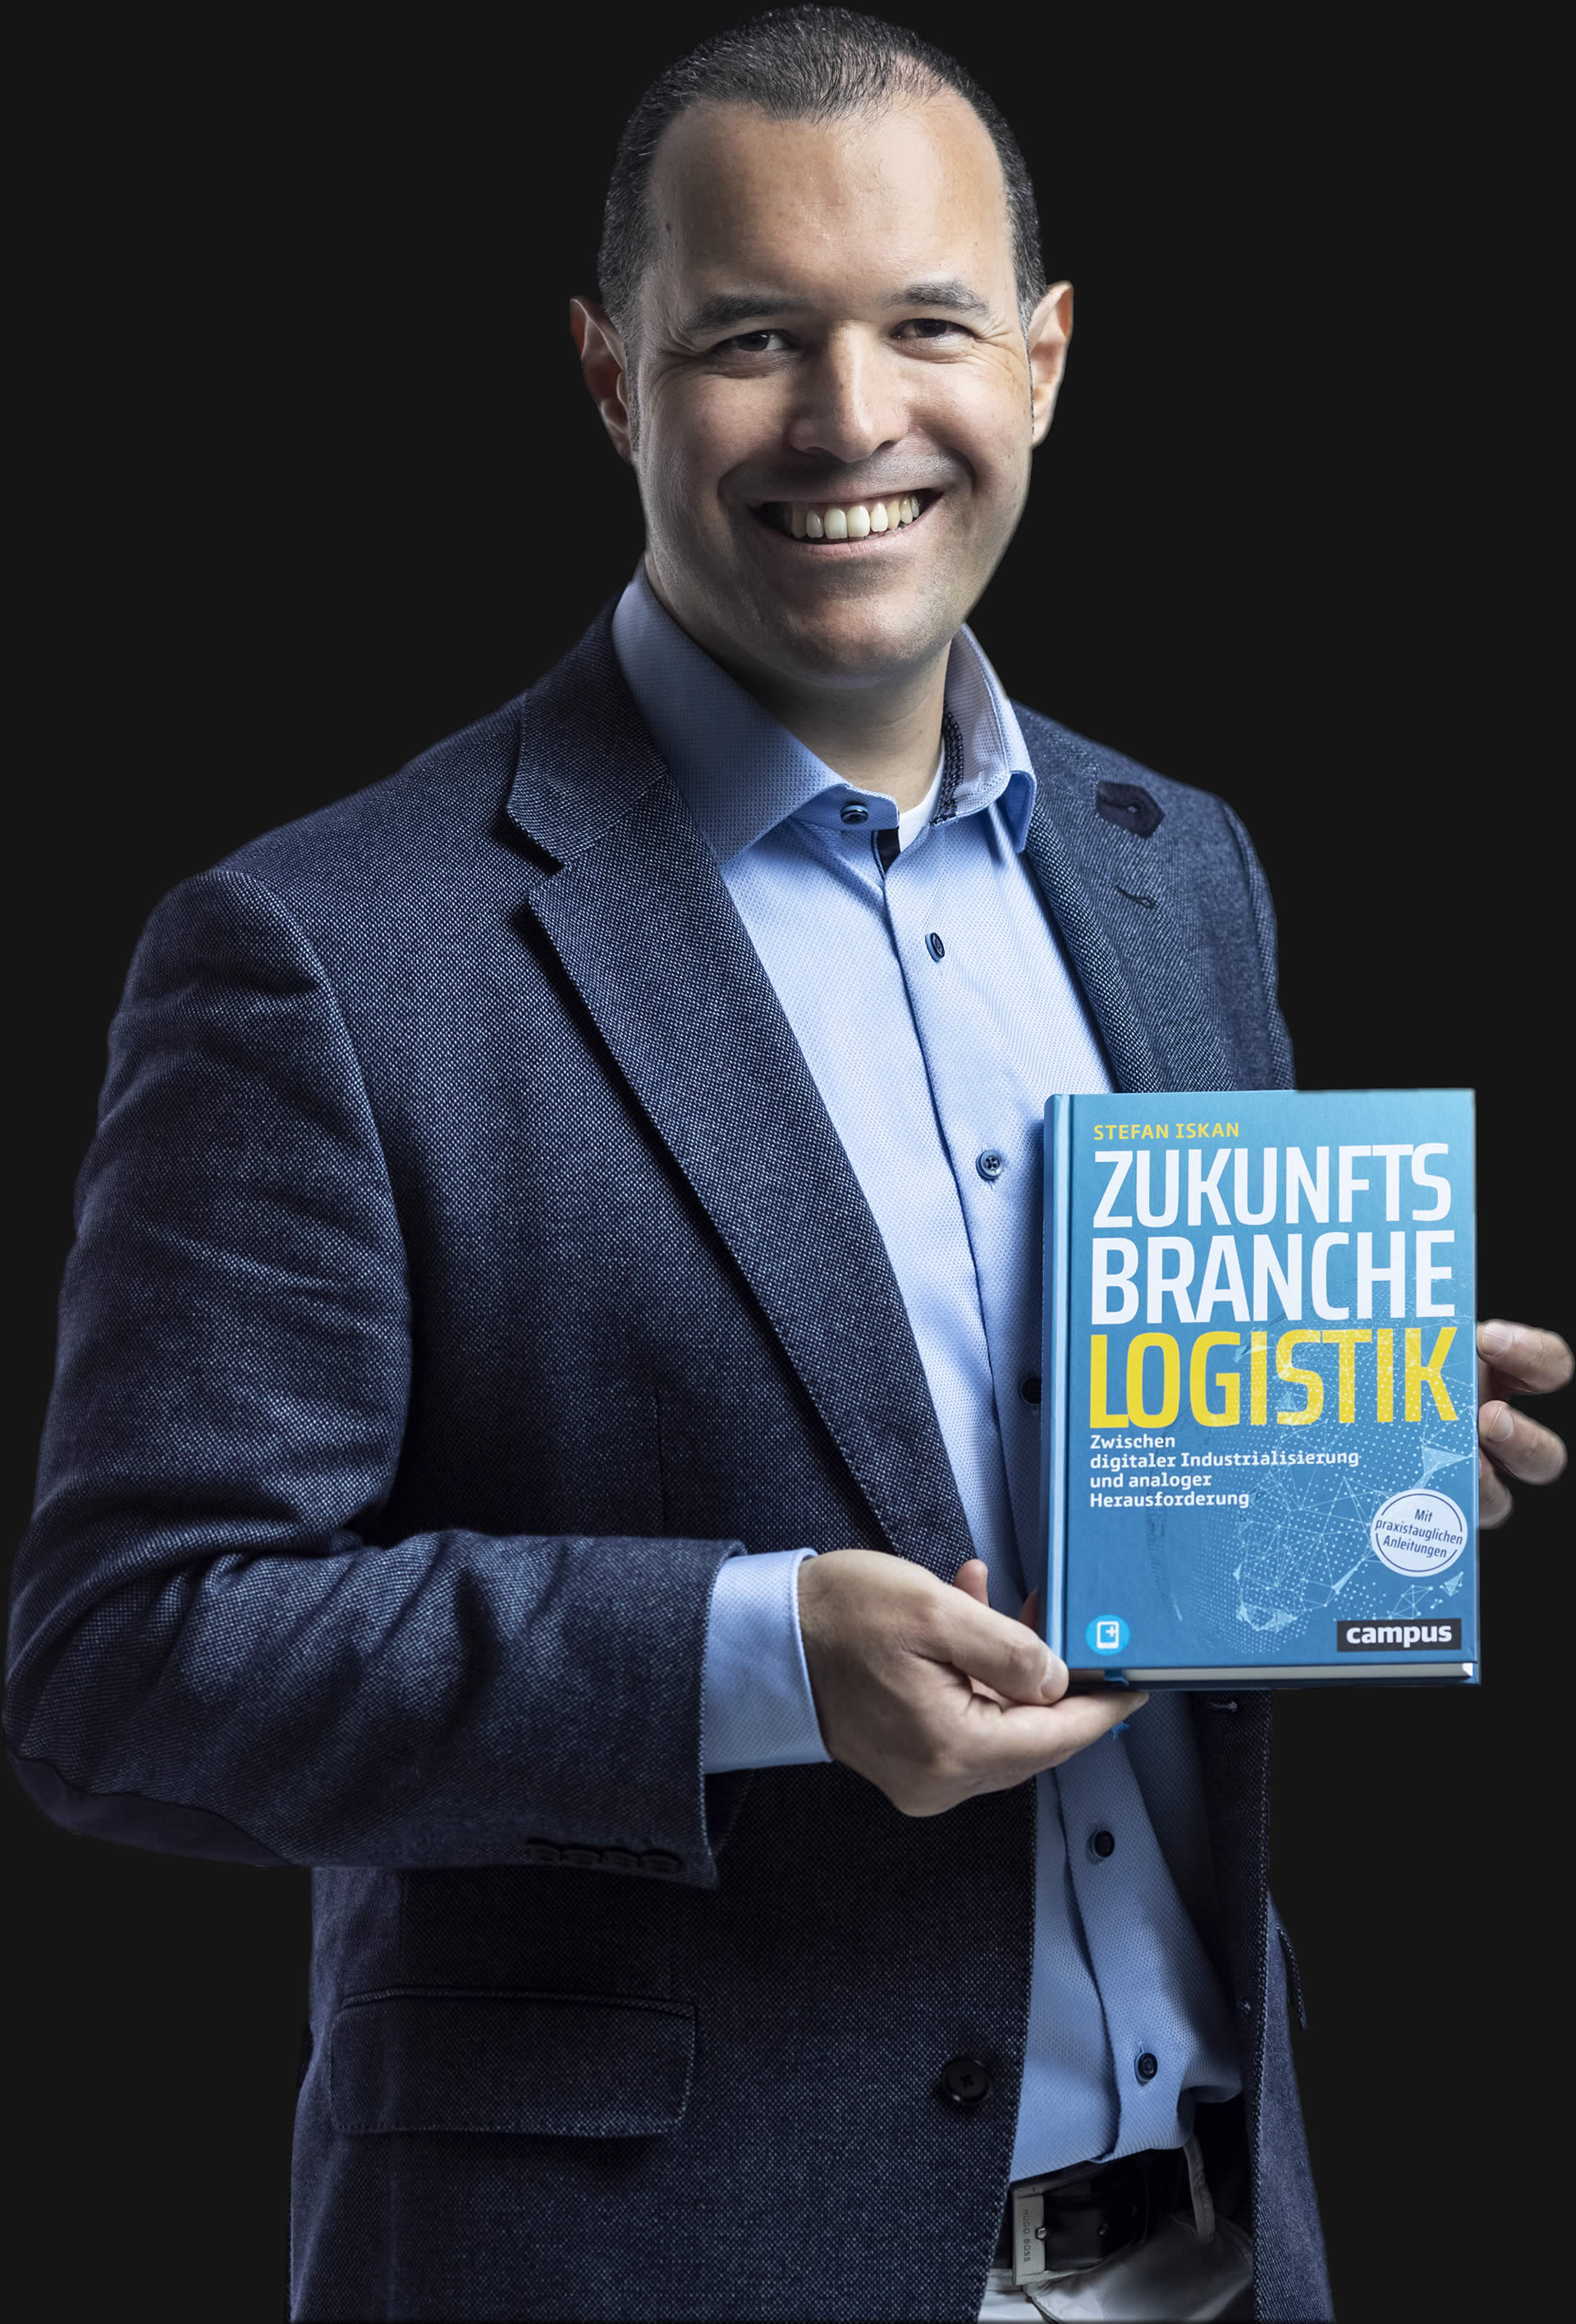 Prof. Dr. Stefan Iskan with his new reference book "Zukunftsbranche Logistik" (Image: Iskan)